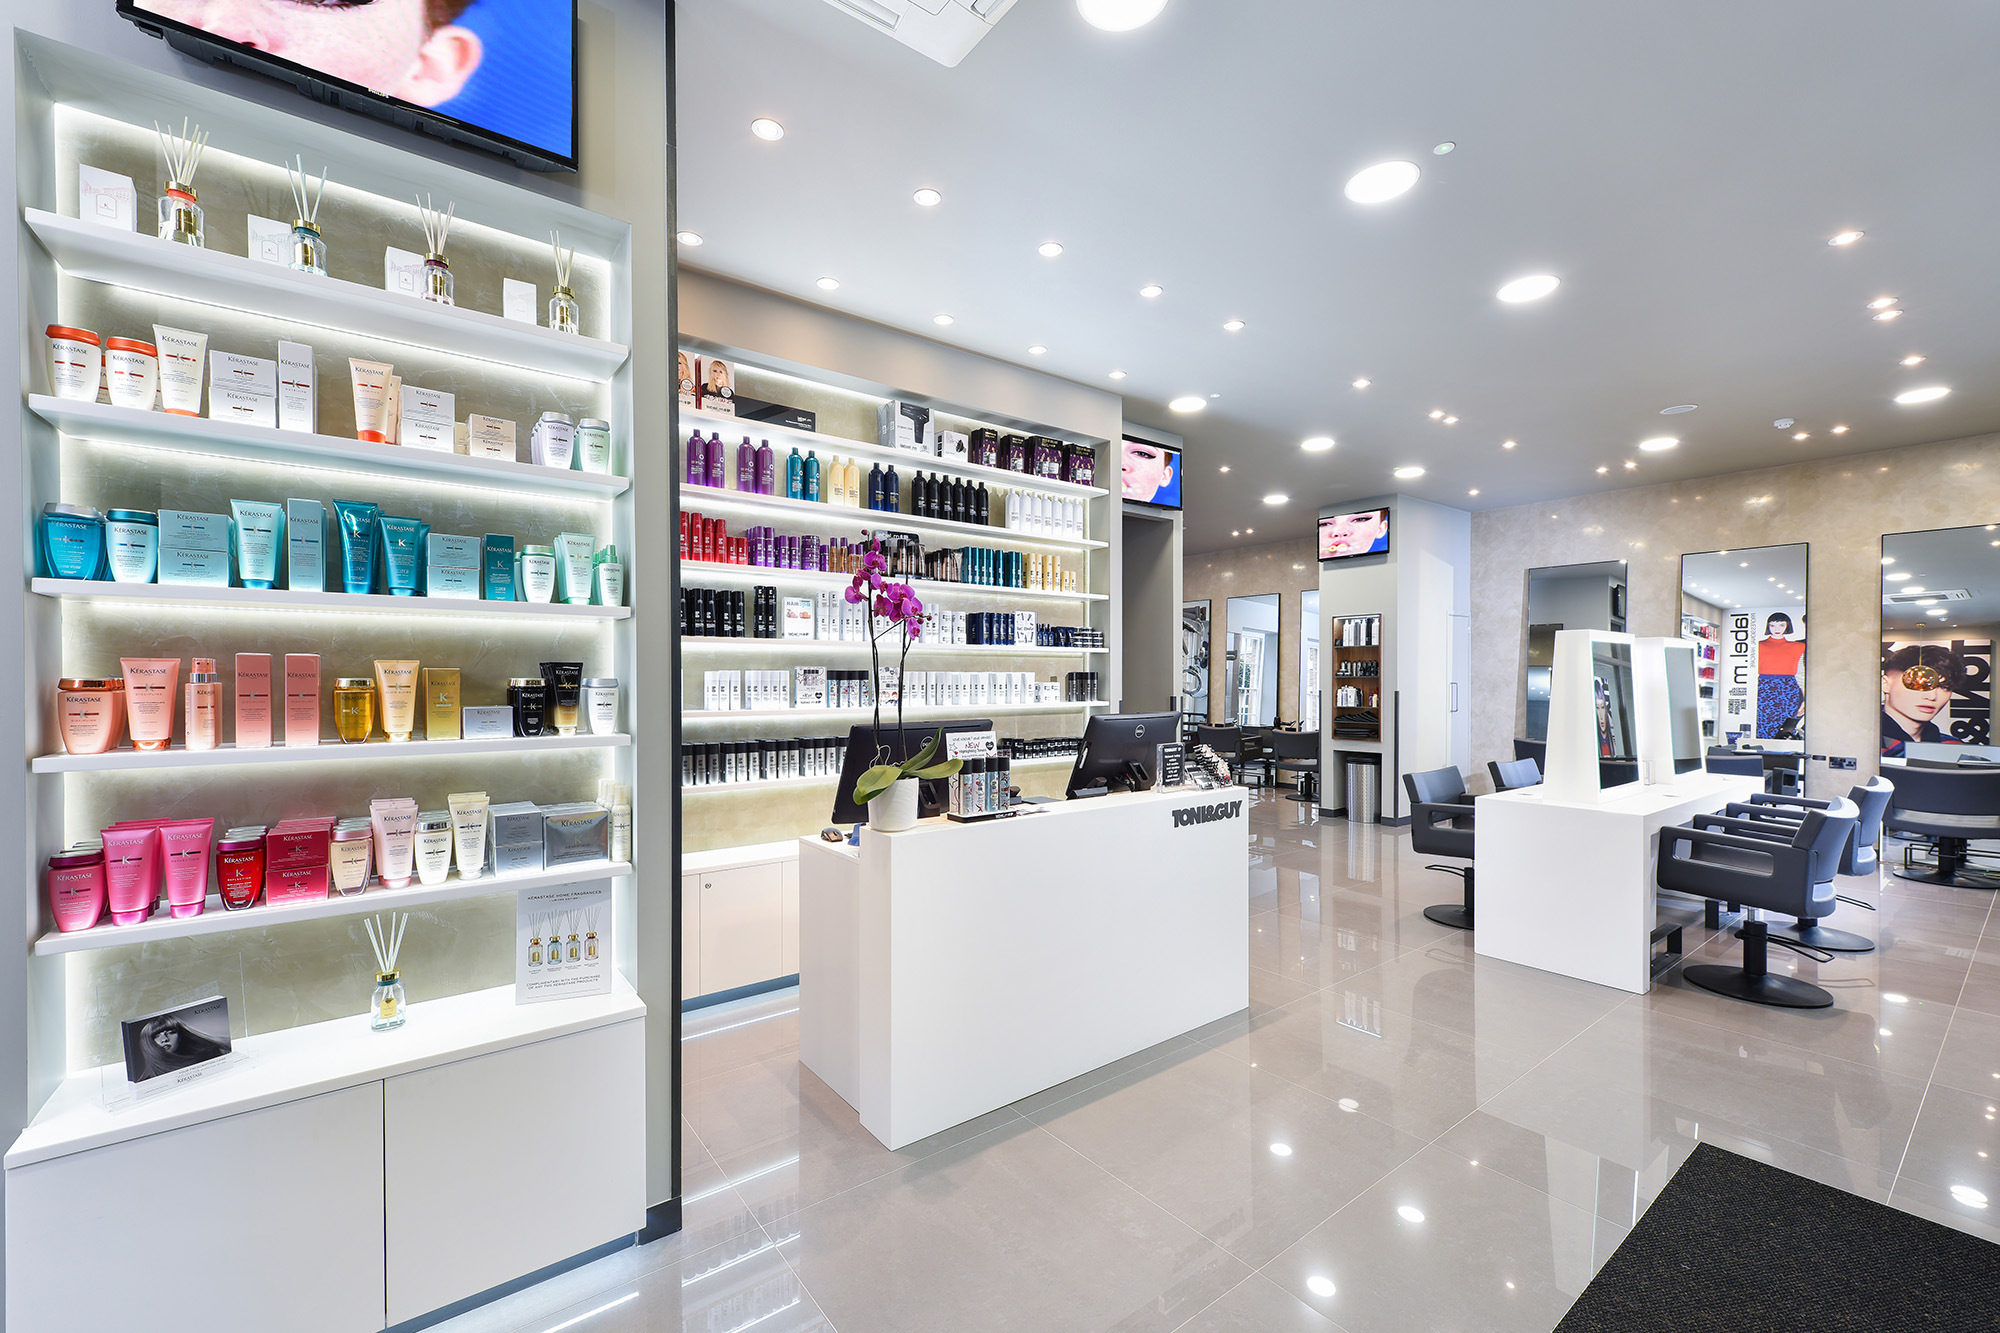 Premier Interior Systems - Toni and Guy - Bespoke Interior Fit Out Commercial Refurbishment